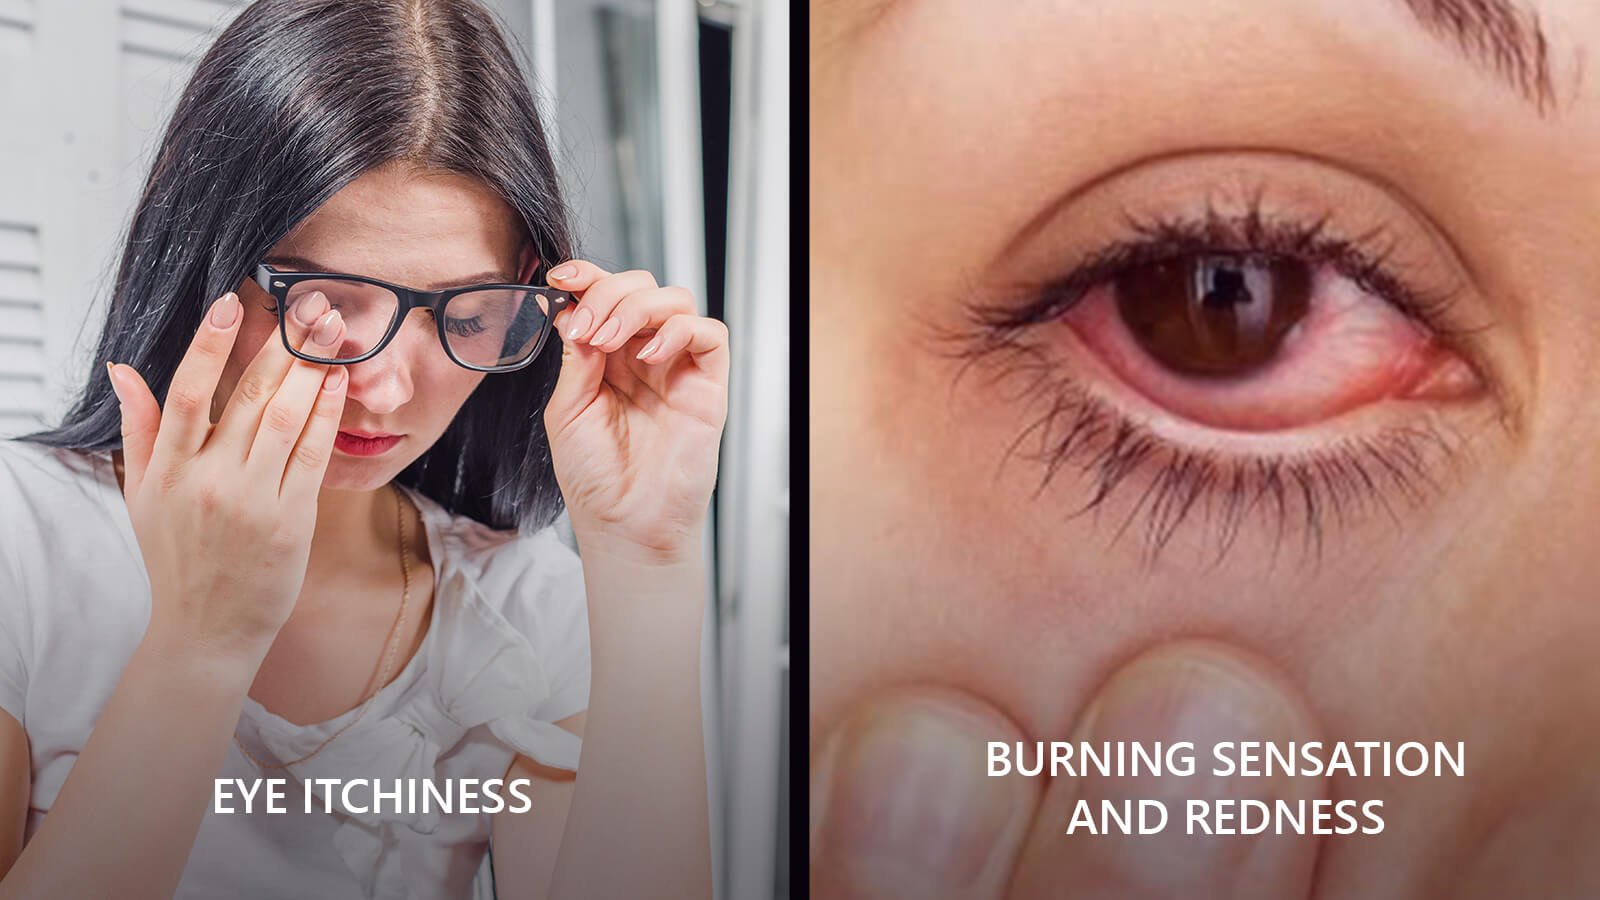 Dry-eye syndrome creates itchiness, burning sensation, redness and often blurred vision in our eyes.